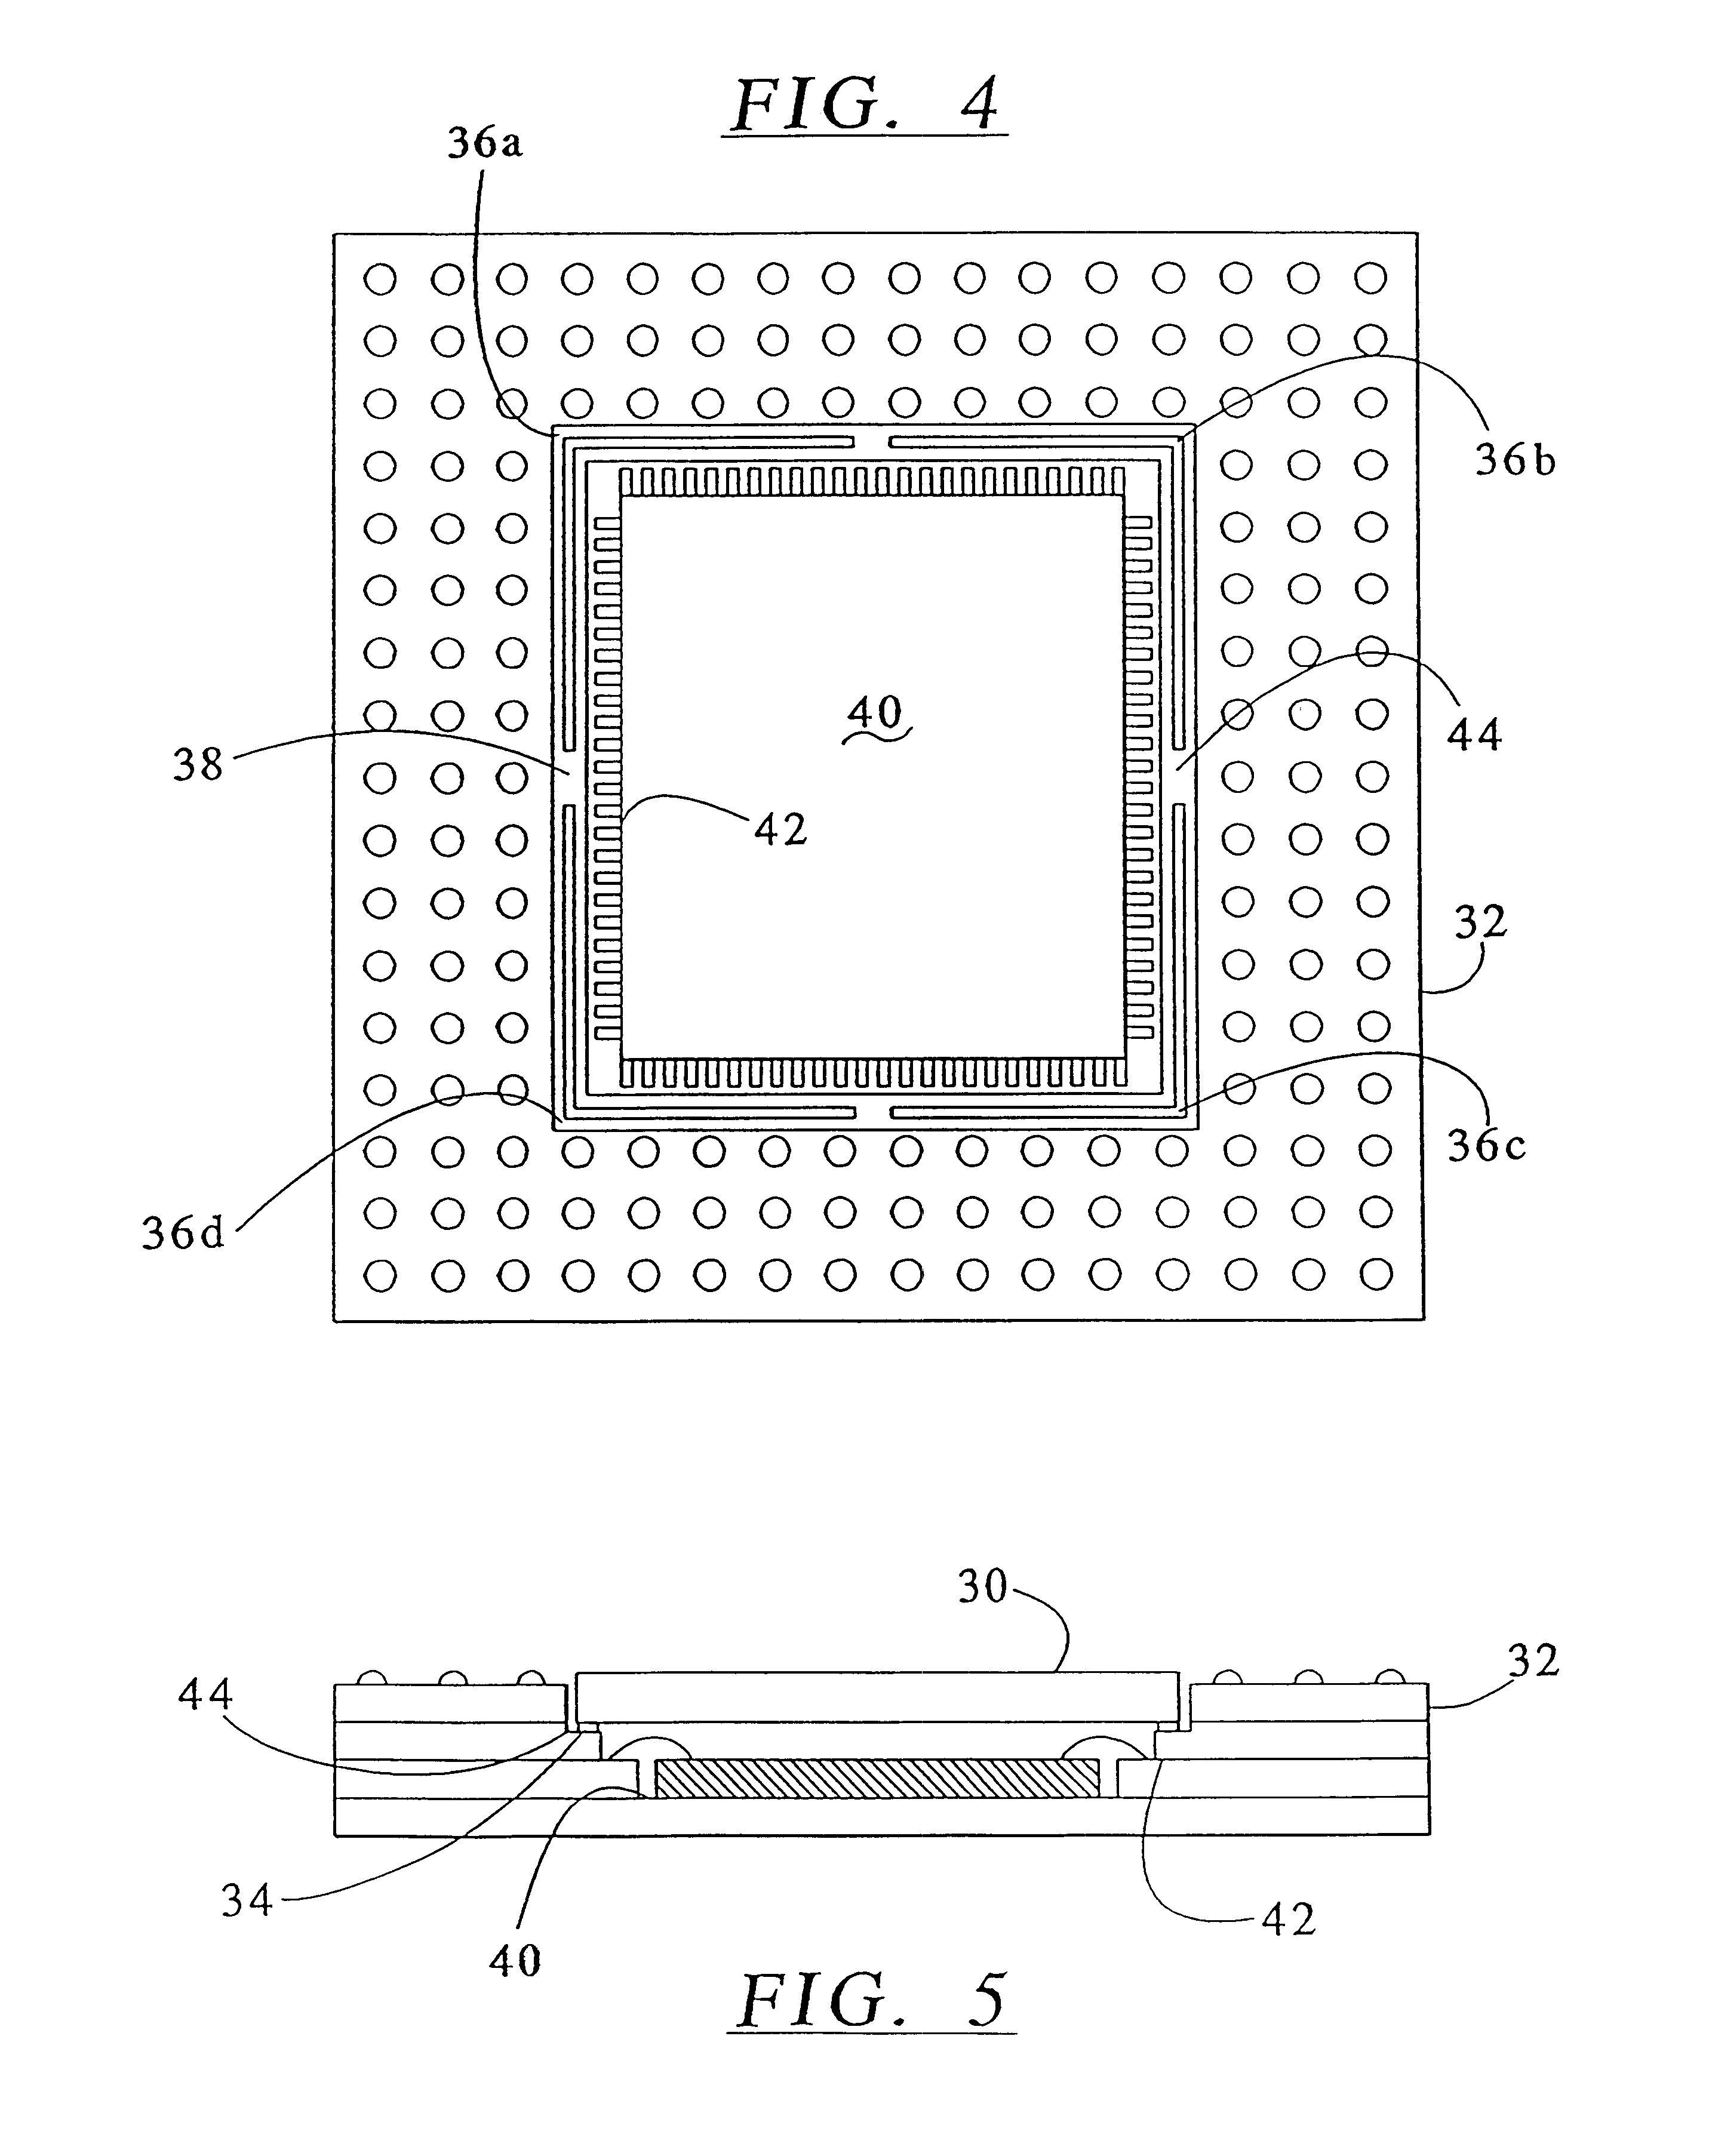 Floating plate capacitor with extremely wide band low impedance